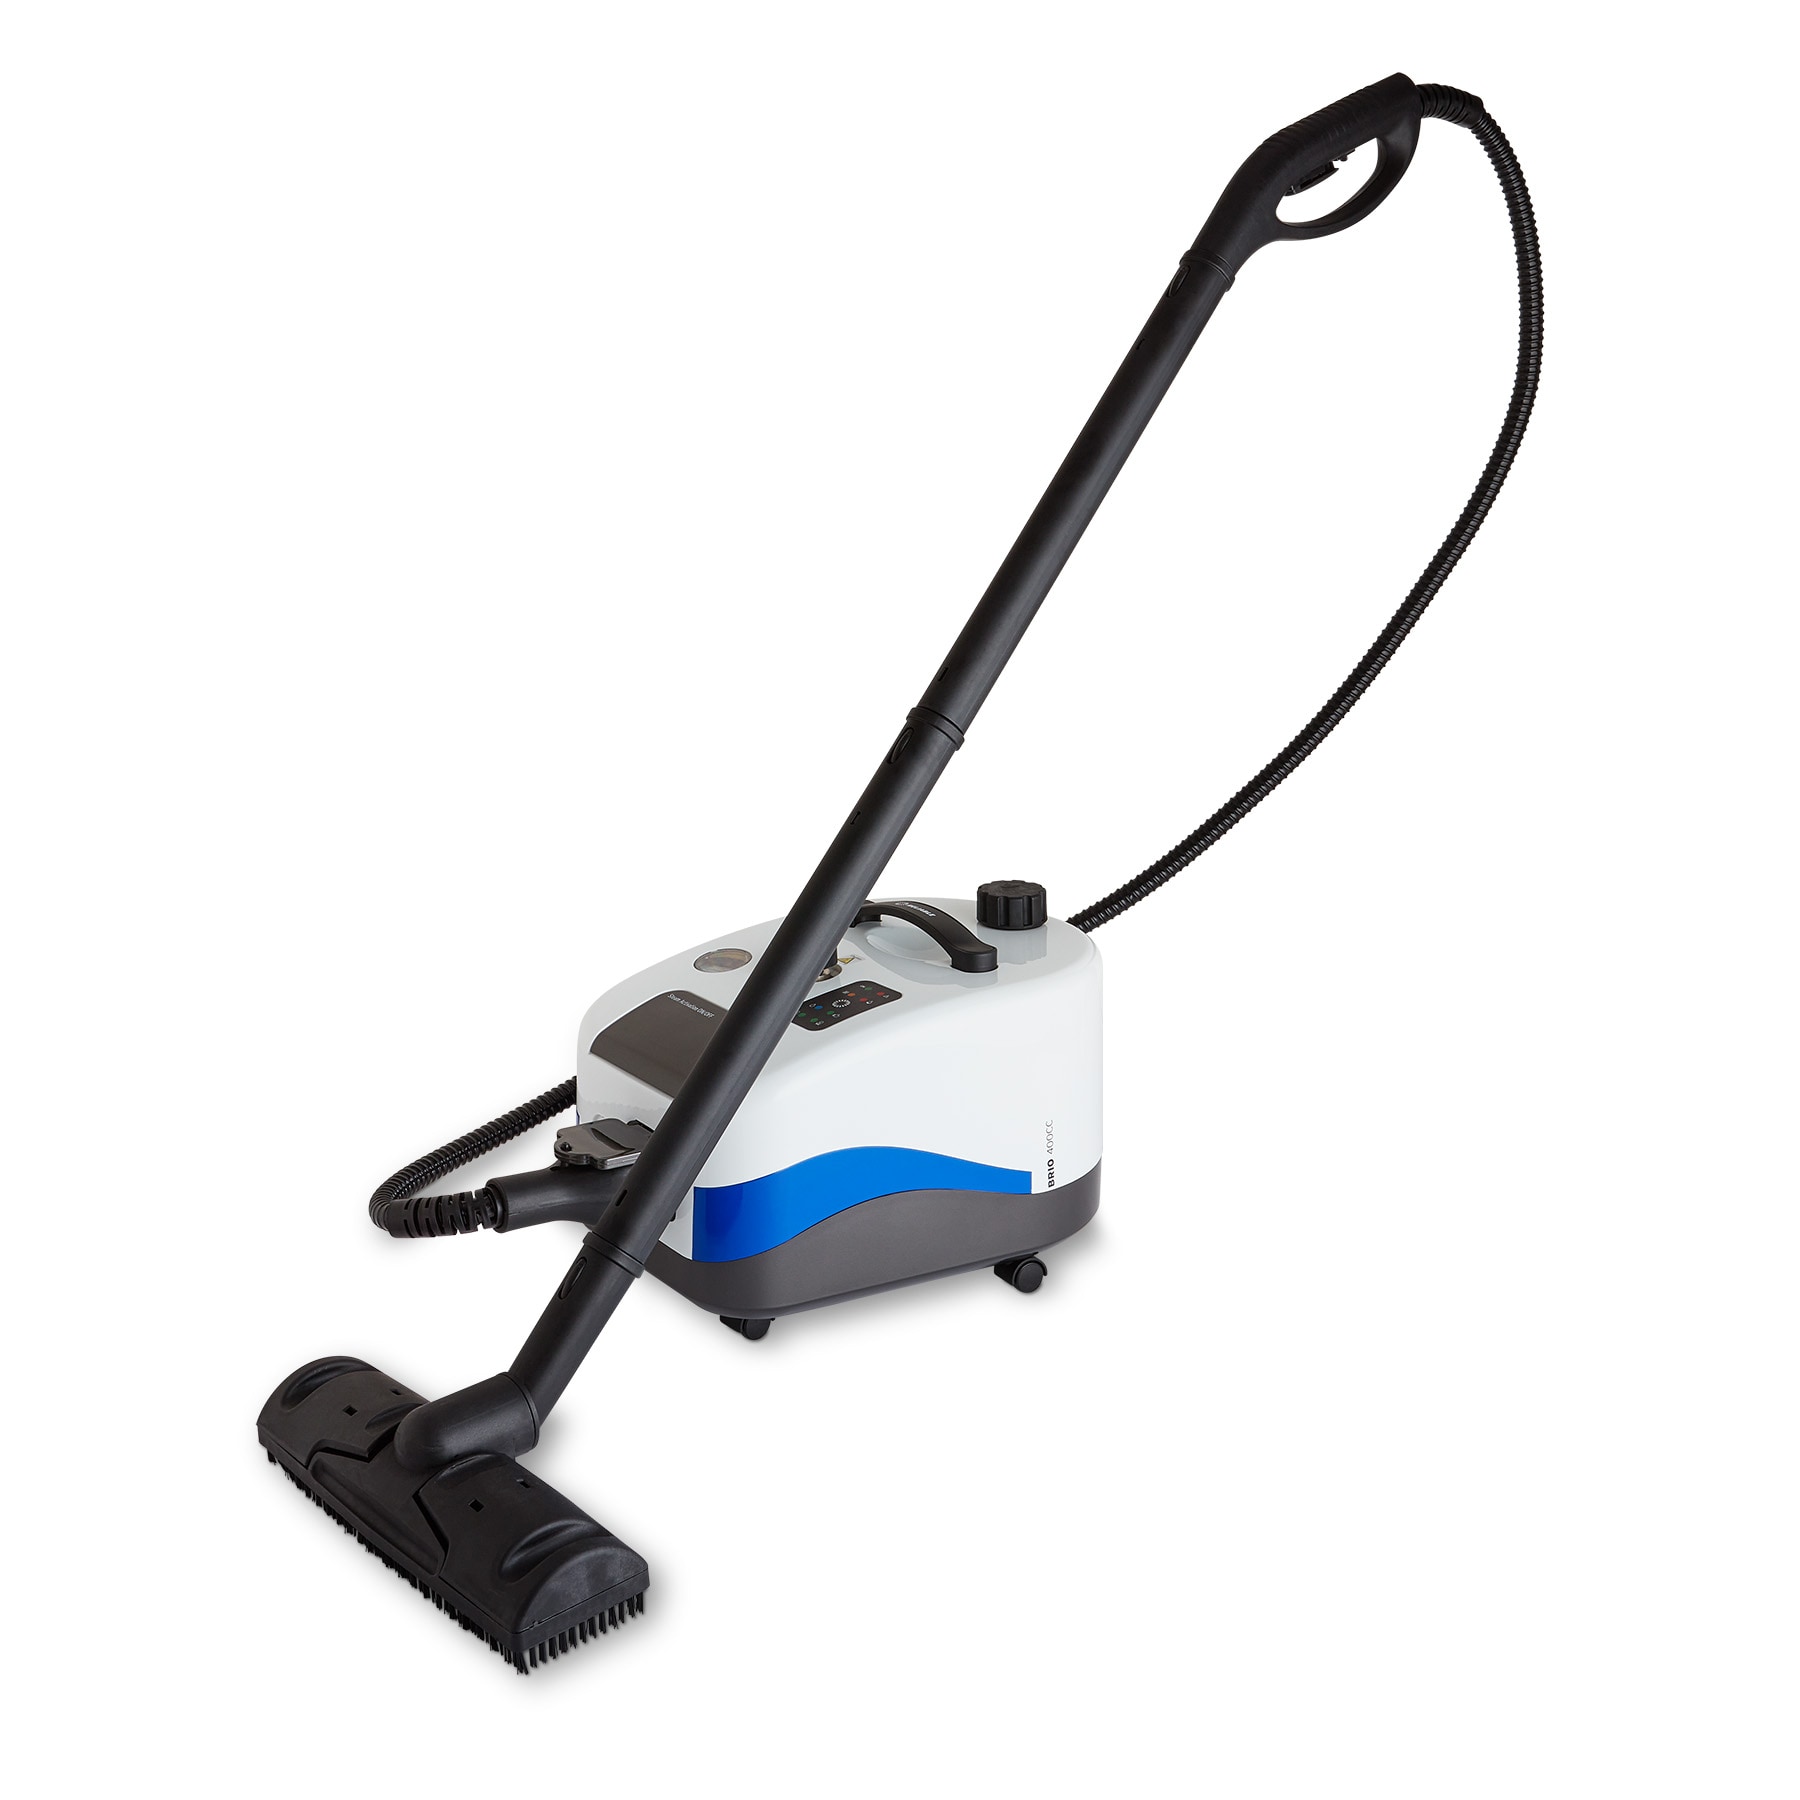 Have learned gallon Thermal Reliable Vacuum Cleaners & Floor Care at Lowes.com